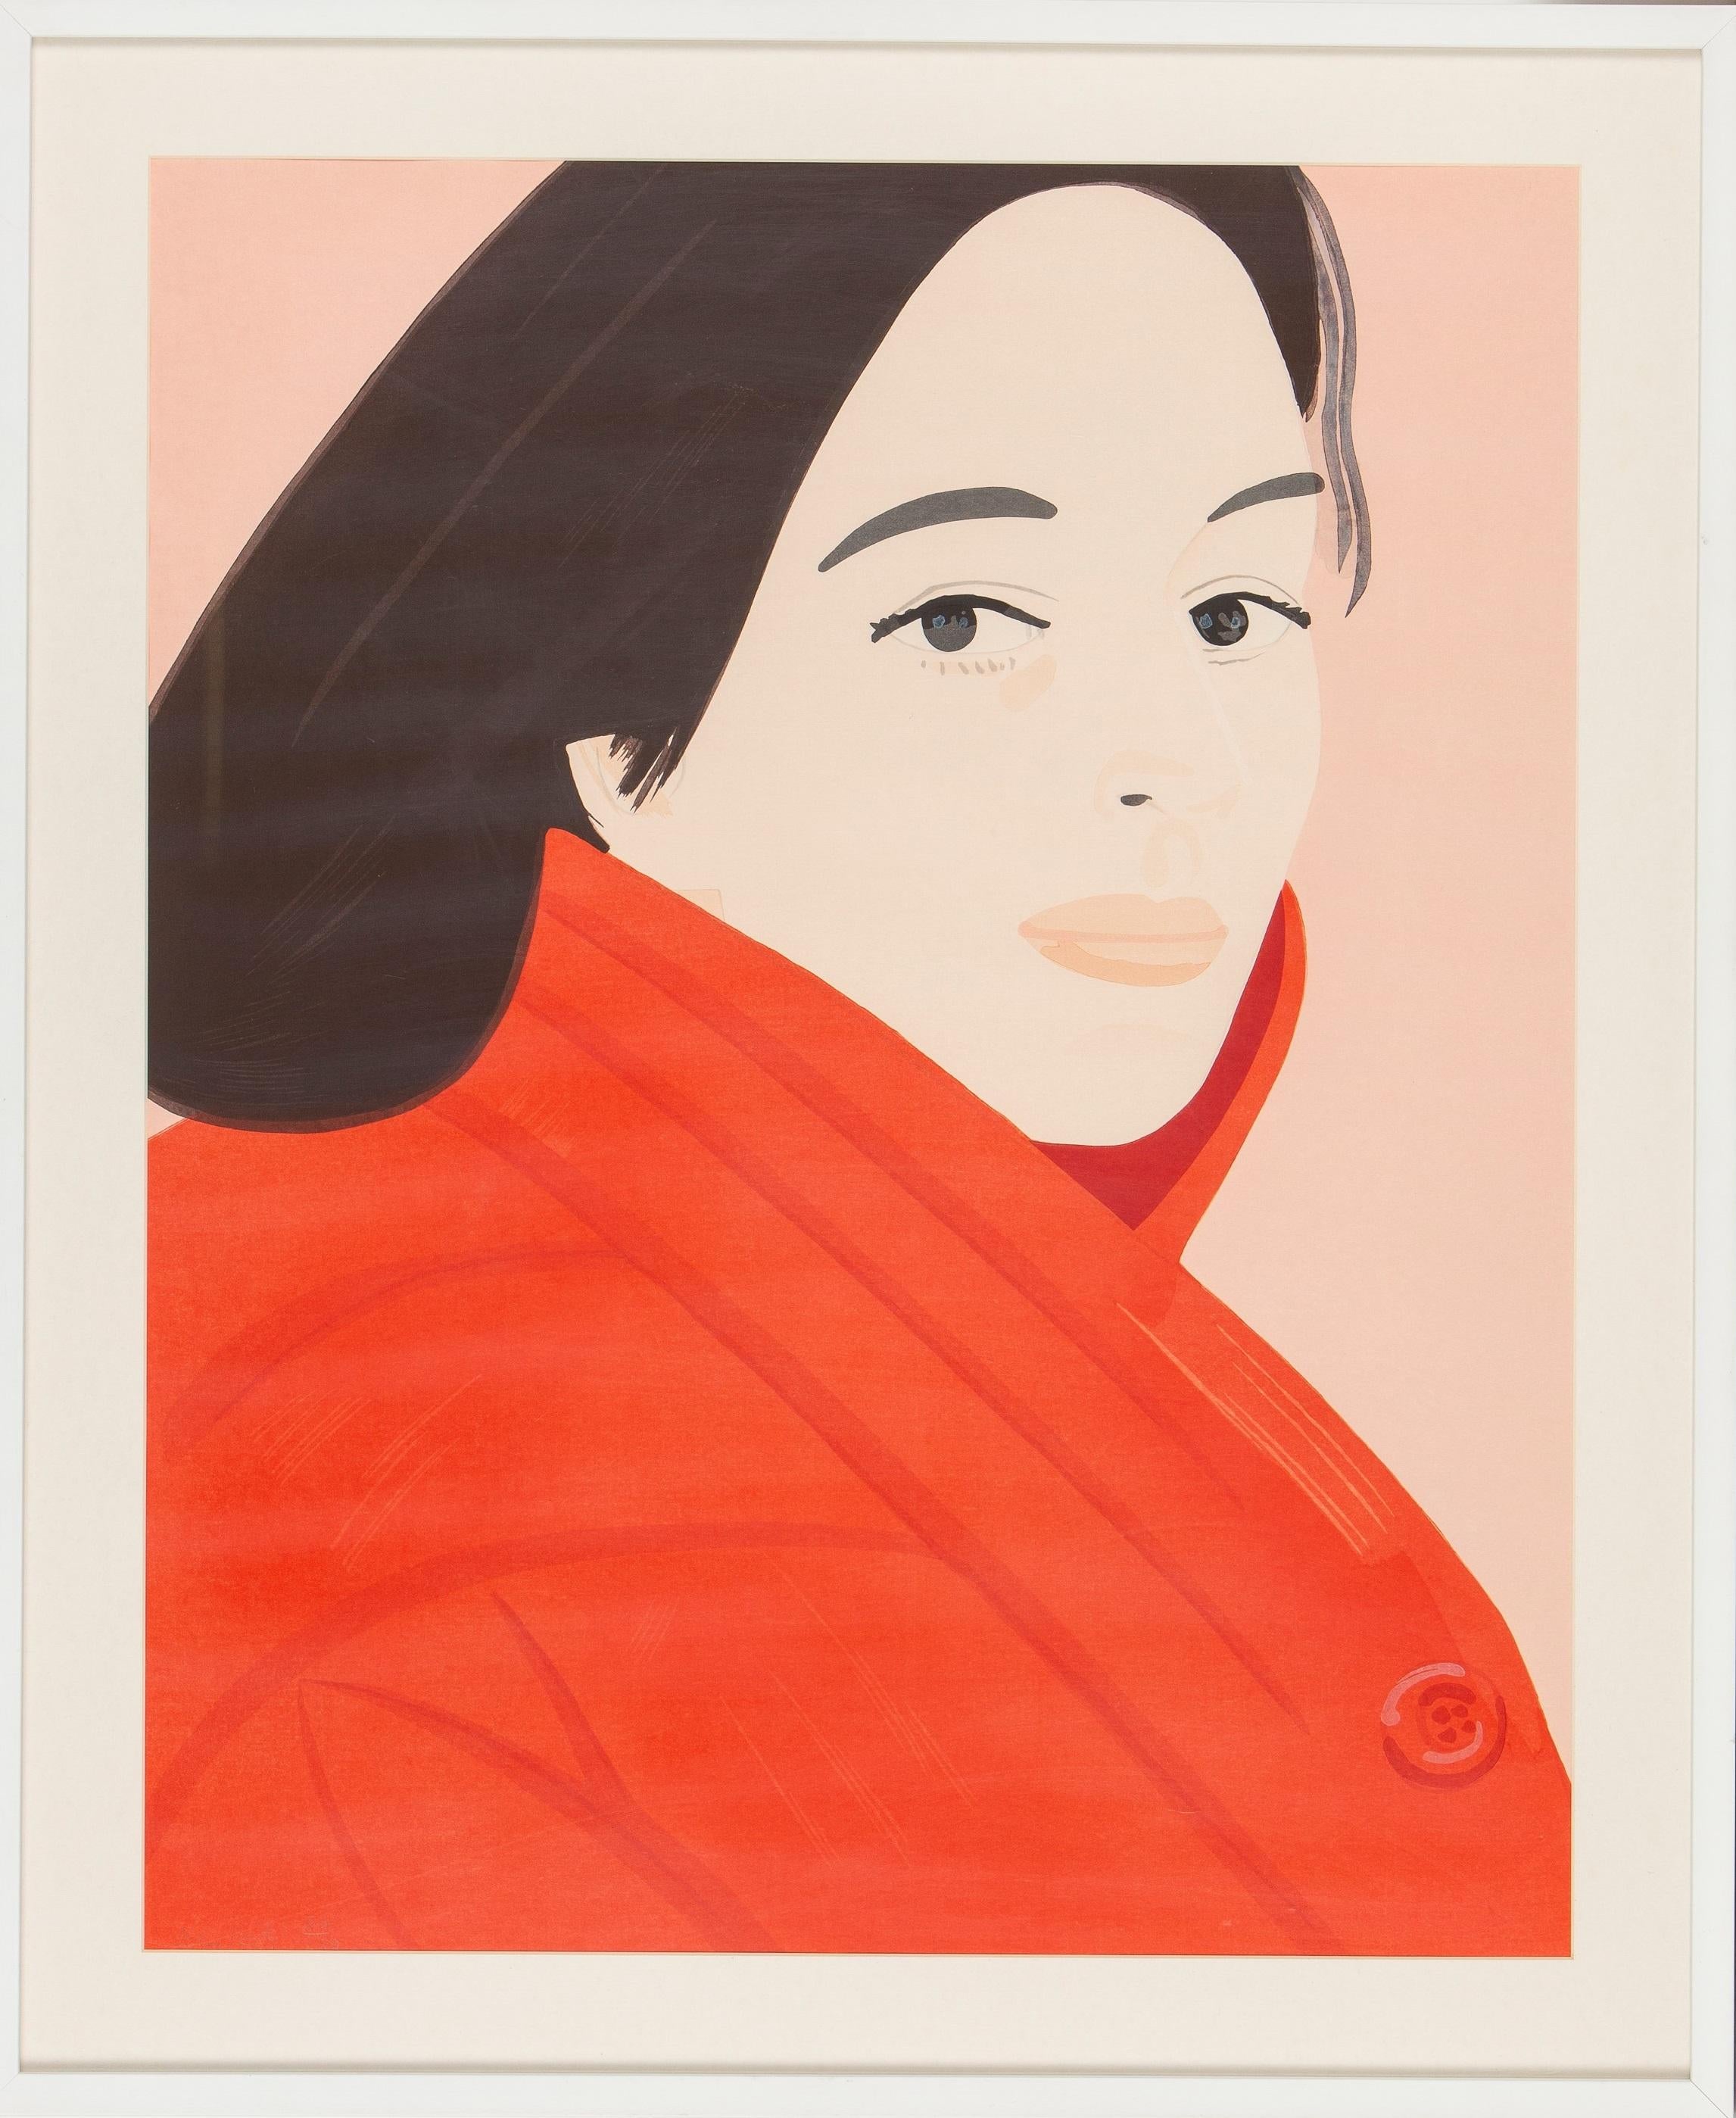 Brisk Day, Woodcut (1990) 
A rare and historic lithograph by Alex Katz signed and numbered by the artist, which portrays Ada in a red dress.
Image, sheet 91.5 x 74 cm.
Framed: 105.5 x 87.5 x 3cm.
Edition 84/150

Provenance
Candybar Gallery, Kyoto,